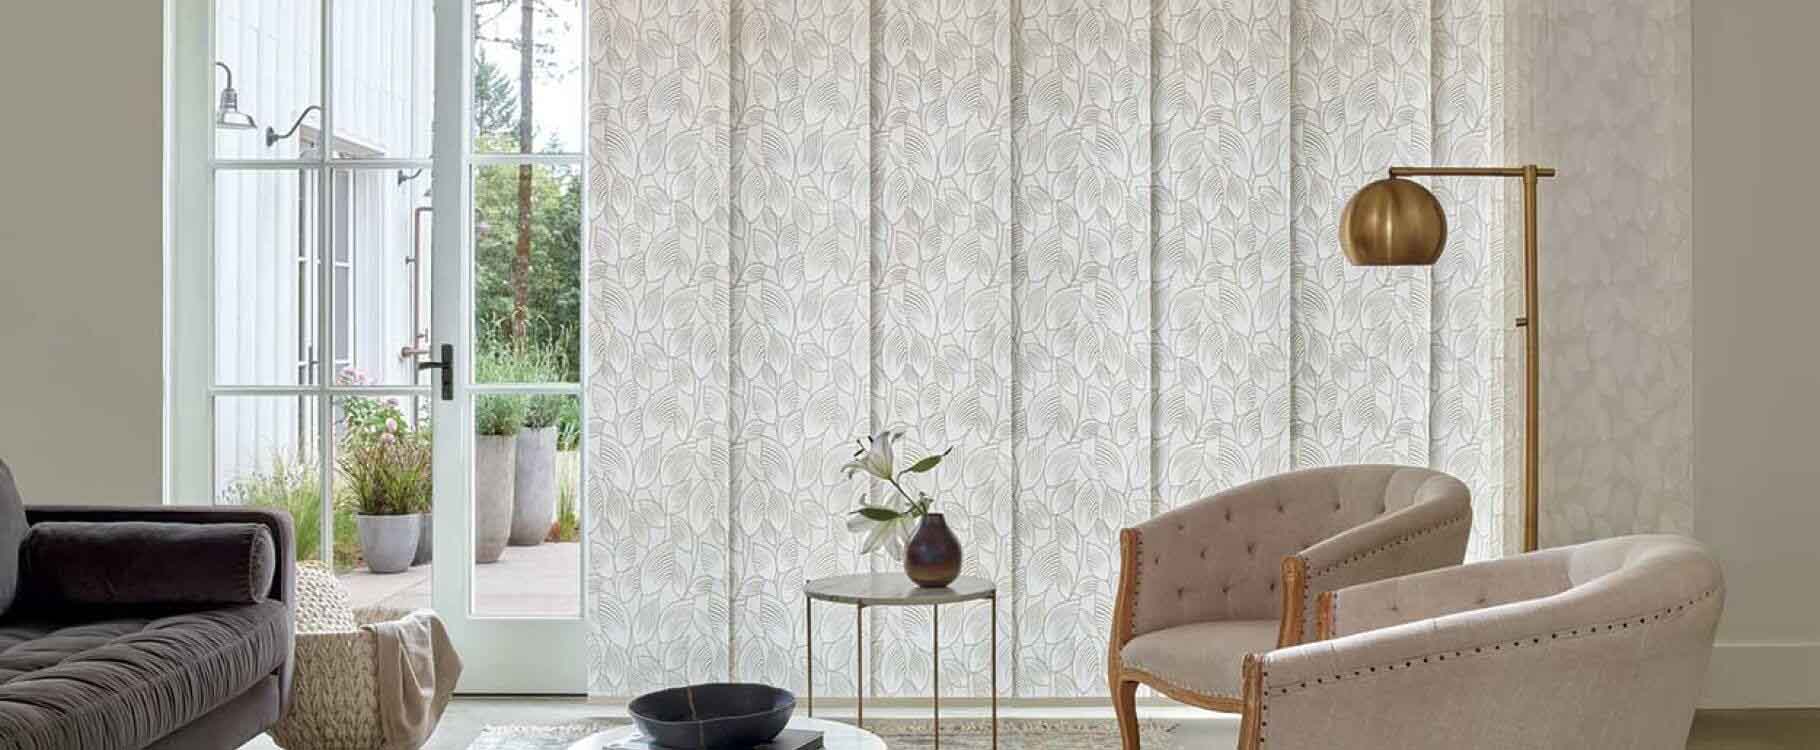 Panel Blinds vs Curtains: Which is the better window furnishing?